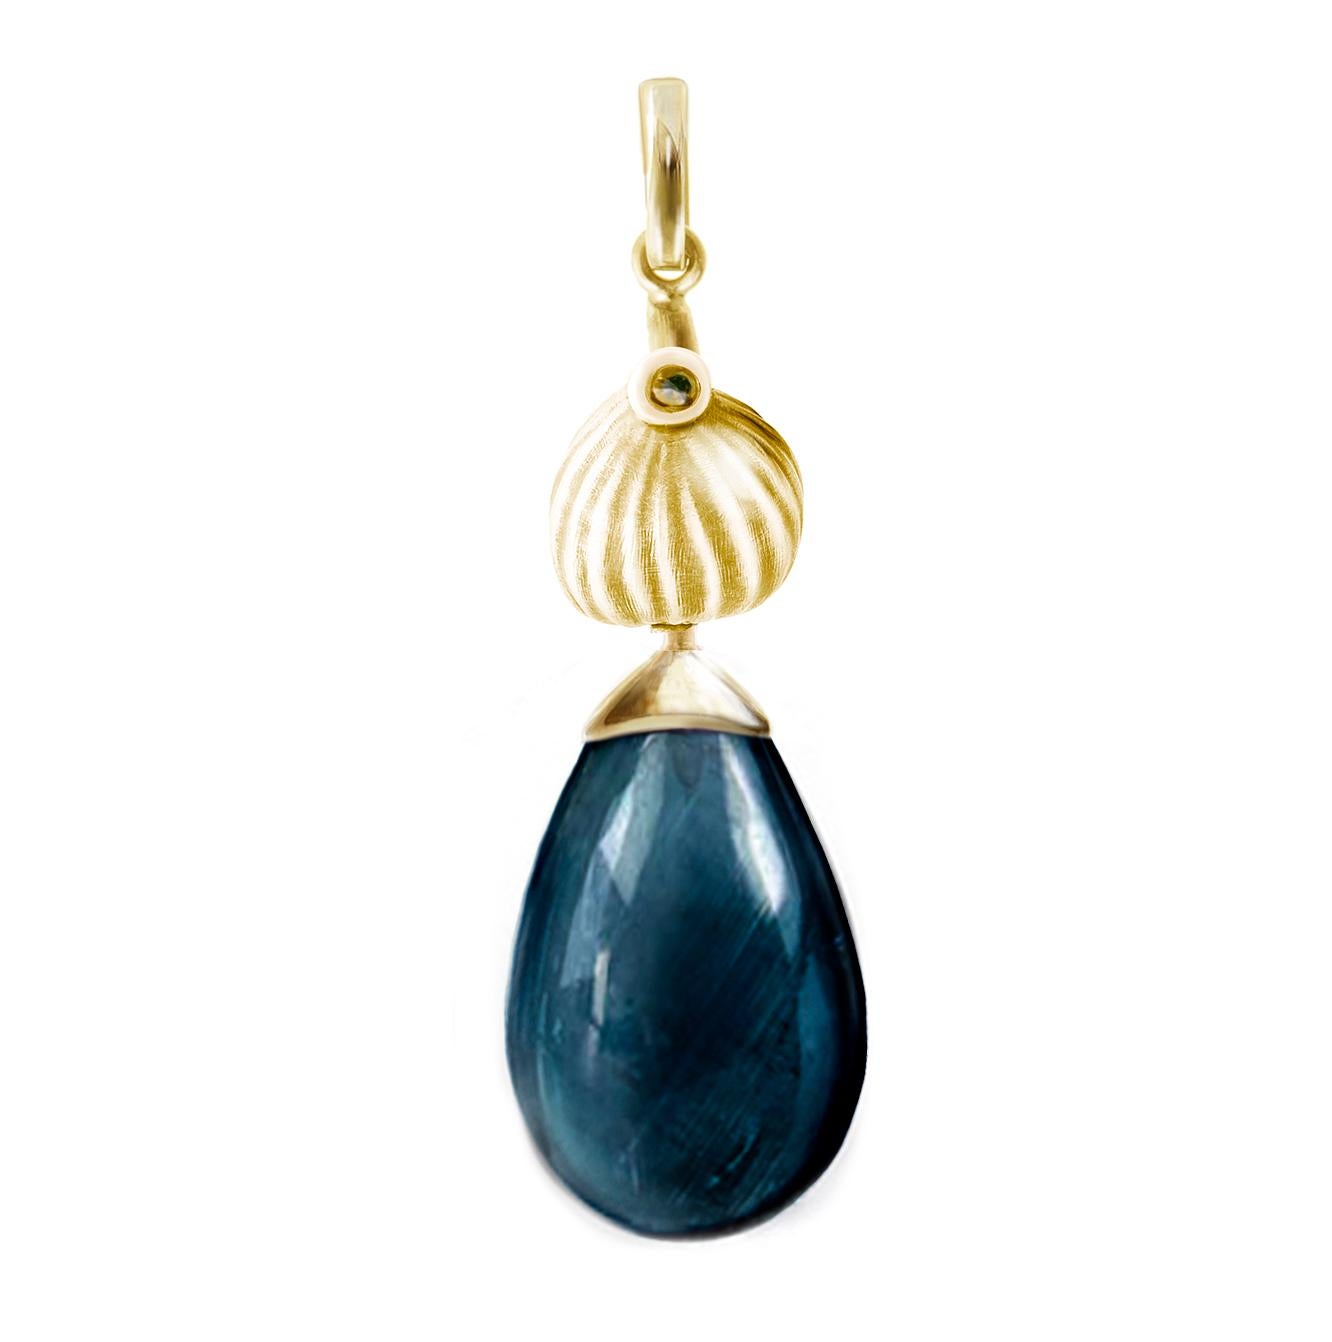 This contemporary drop pendant necklace is made of 18 karat yellow gold and features a natural vivid Indicolite tourmaline (9.42 carats, 17.5x10.5x6 mm) and a round black diamond. The Fig collection was reviewed in Vogue UA.

The idea for the